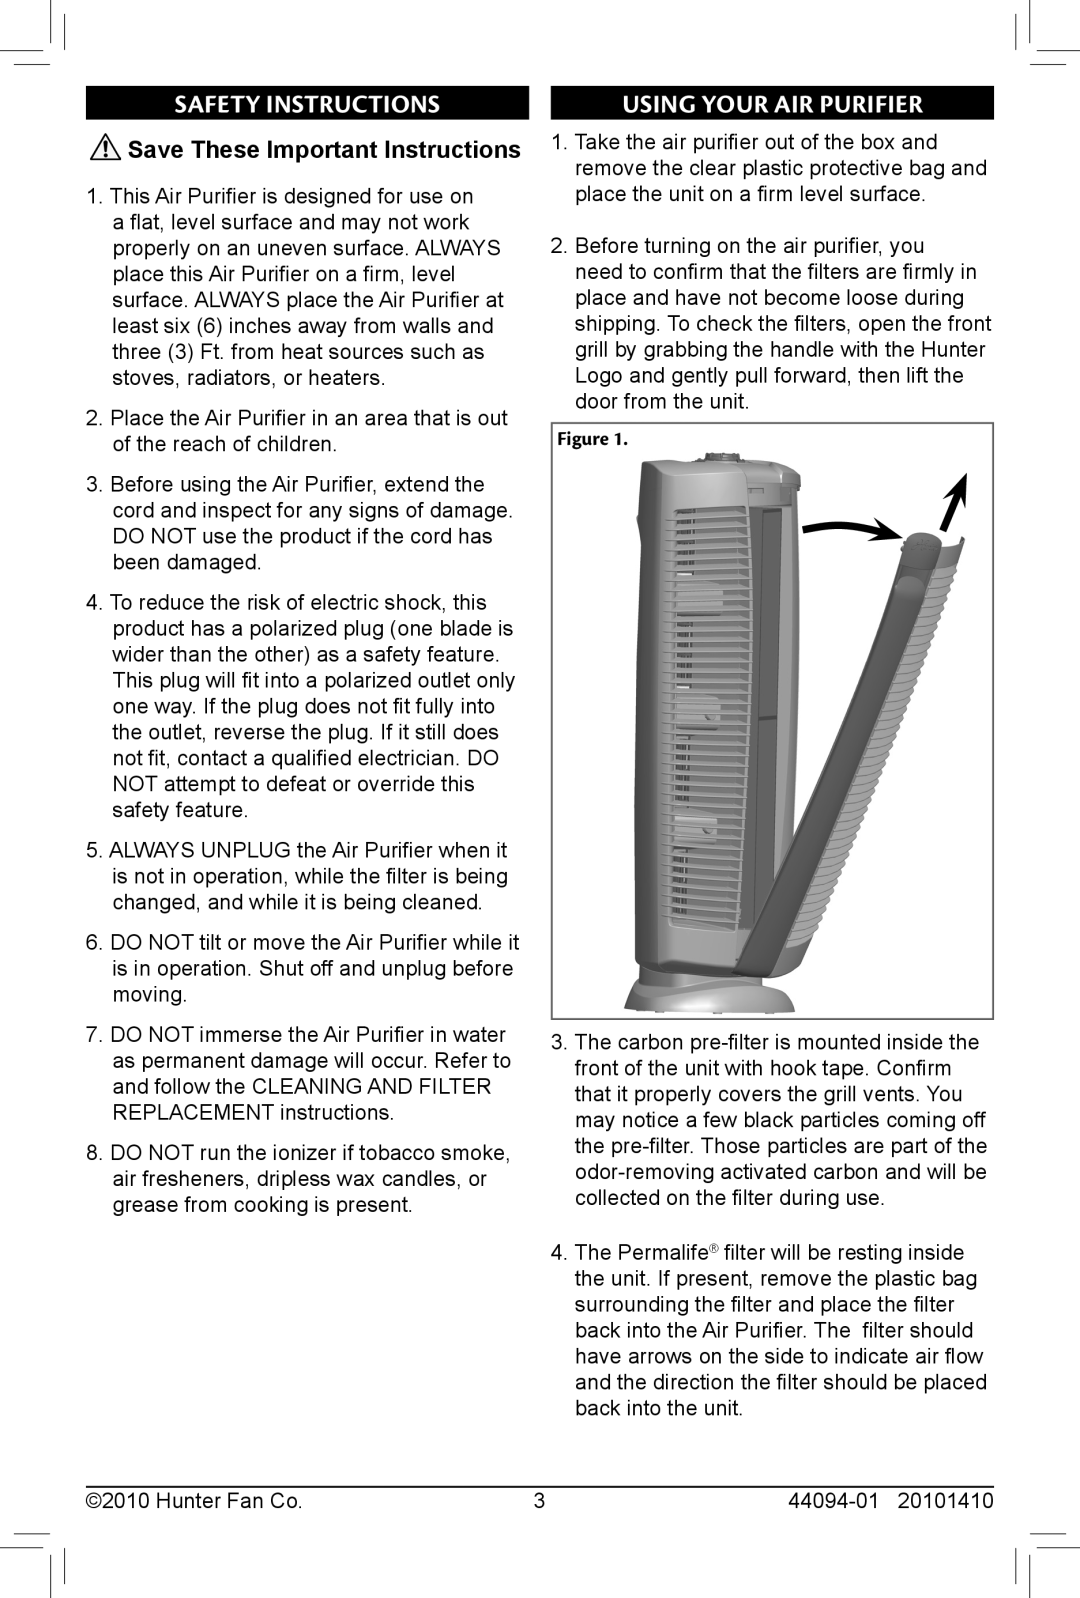 Hunter Fan 30793 owner manual Safety Instructions, Using Your Air Purifier, Save These Important Instructions 